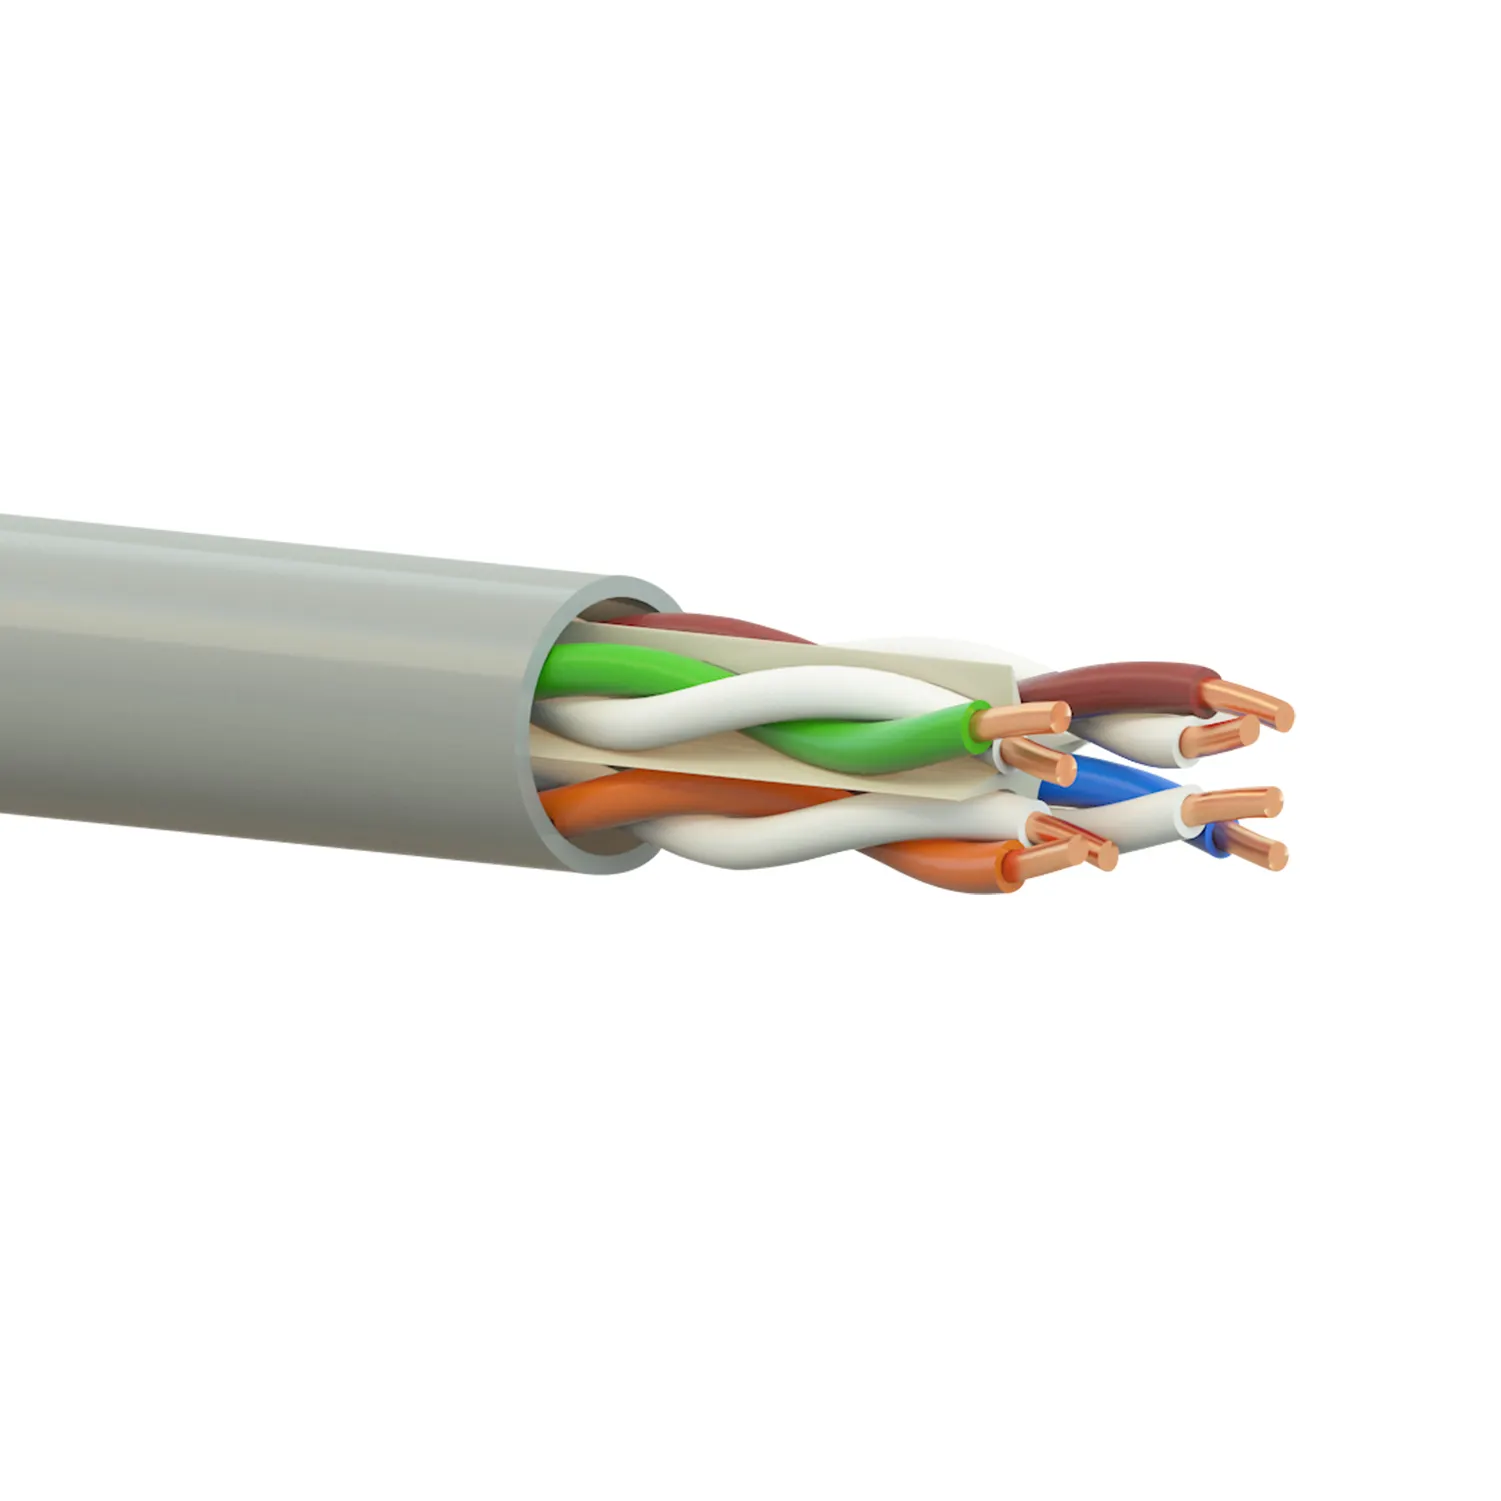 High Quality Pull Box 305m Test 4pair 24 AWG Cobre Cable De Red LAN CABLE Cat6 Network Cable Manufacturer Cat6 UTP 305m Cat